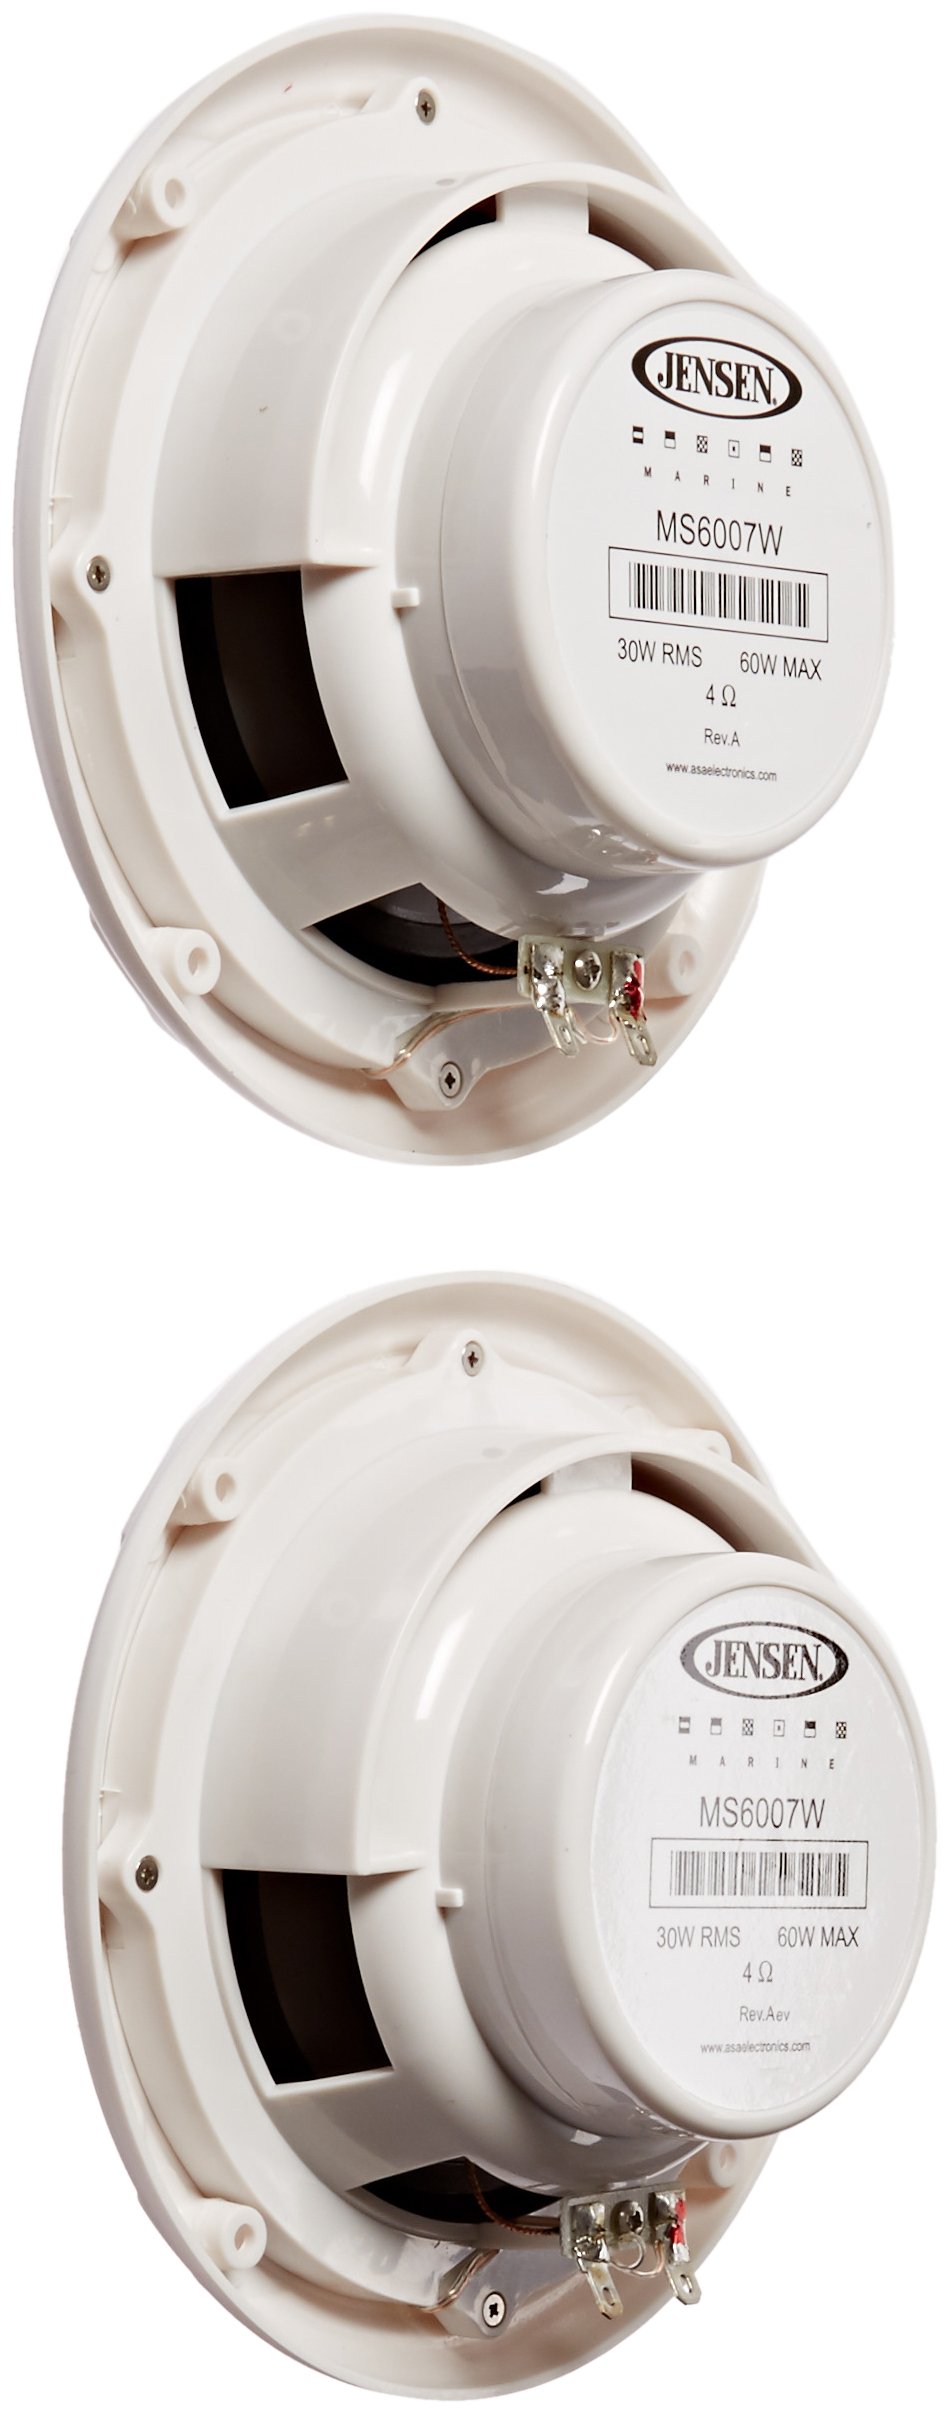 Jensen MS6007WR 6.5” Coaxial Marine Speakers, 60 Watts, White, Sold as Pair